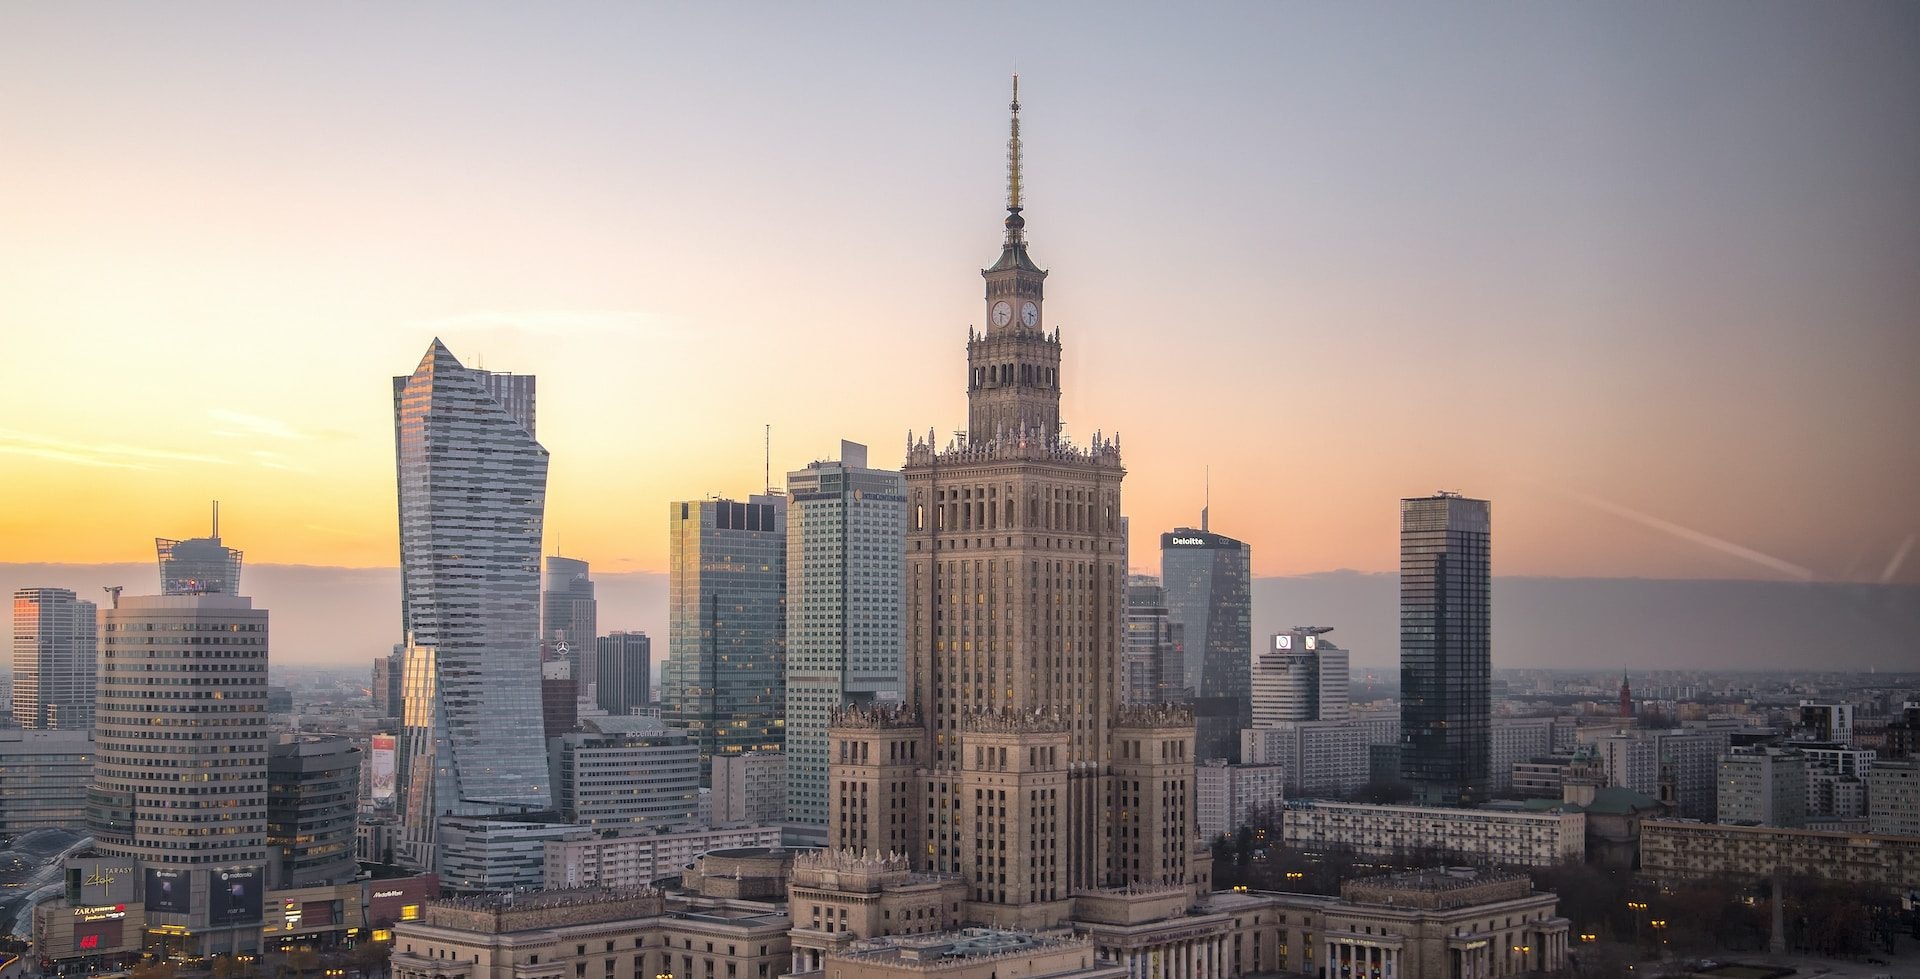 The skyline of Warsaw, with the Palace of Culture and Science and skyskapers